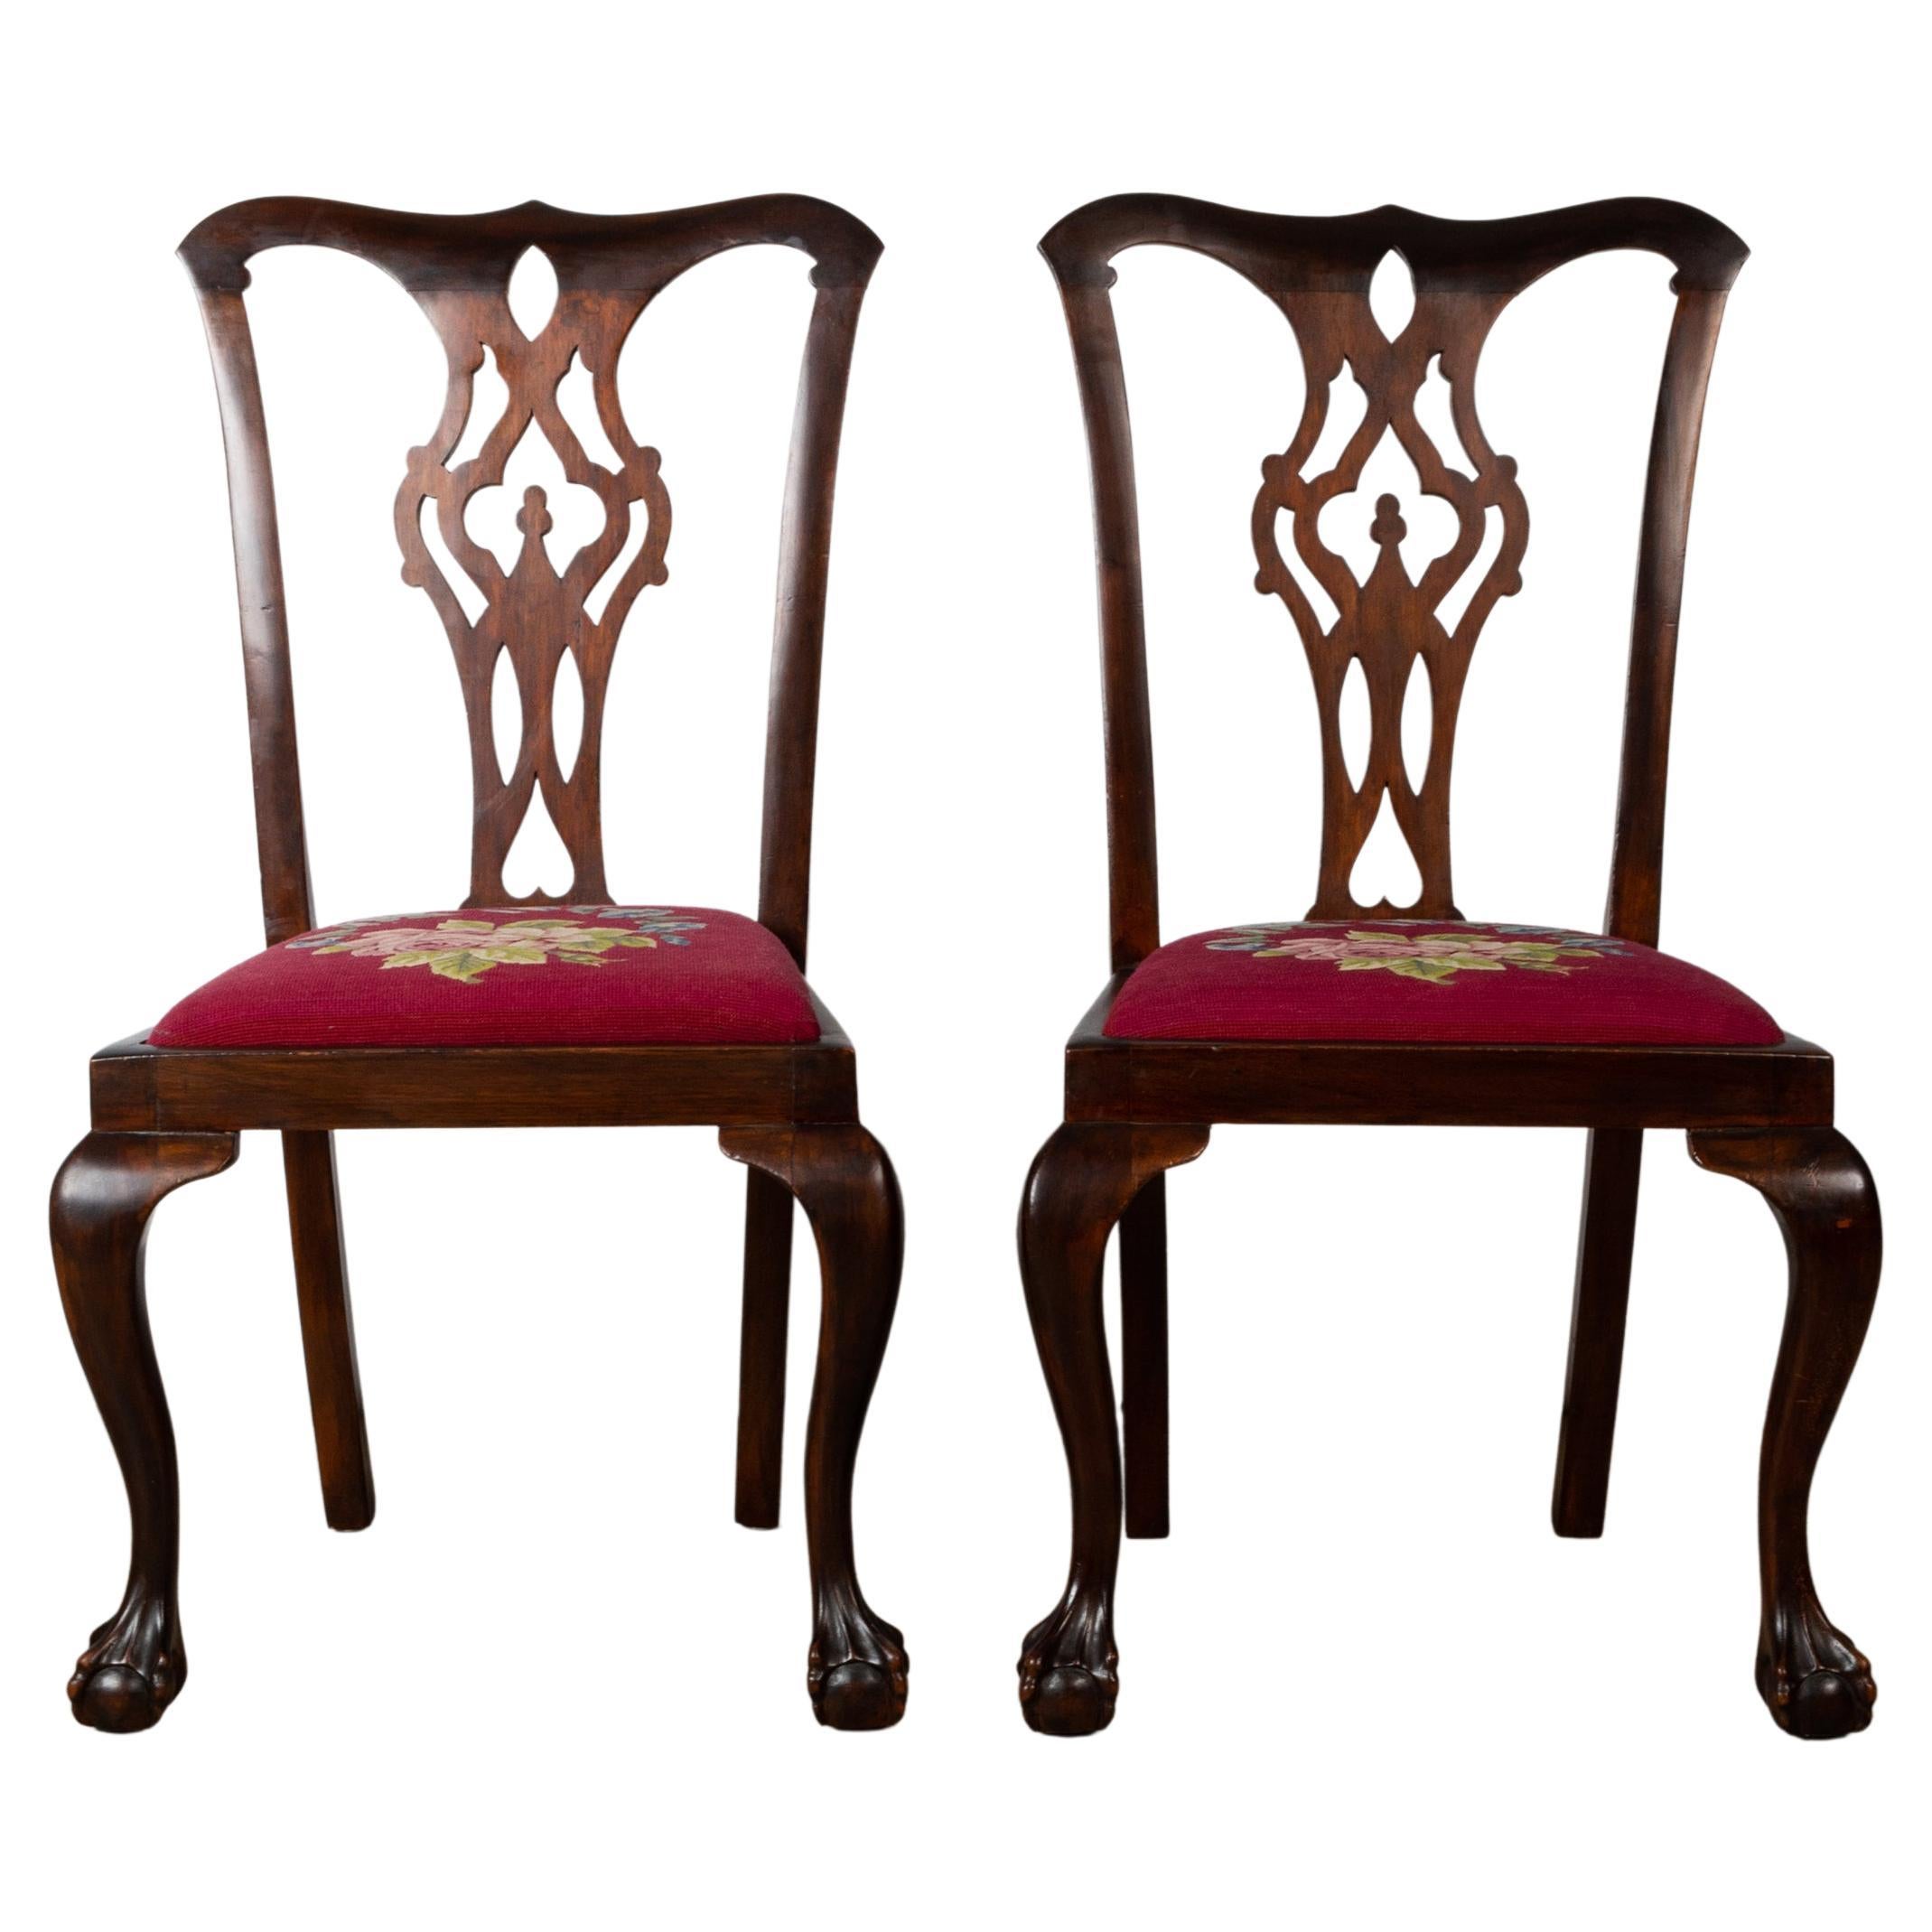 4 Antique English 19th Century Chippendale Revival Mahogany Chairs For Sale 1